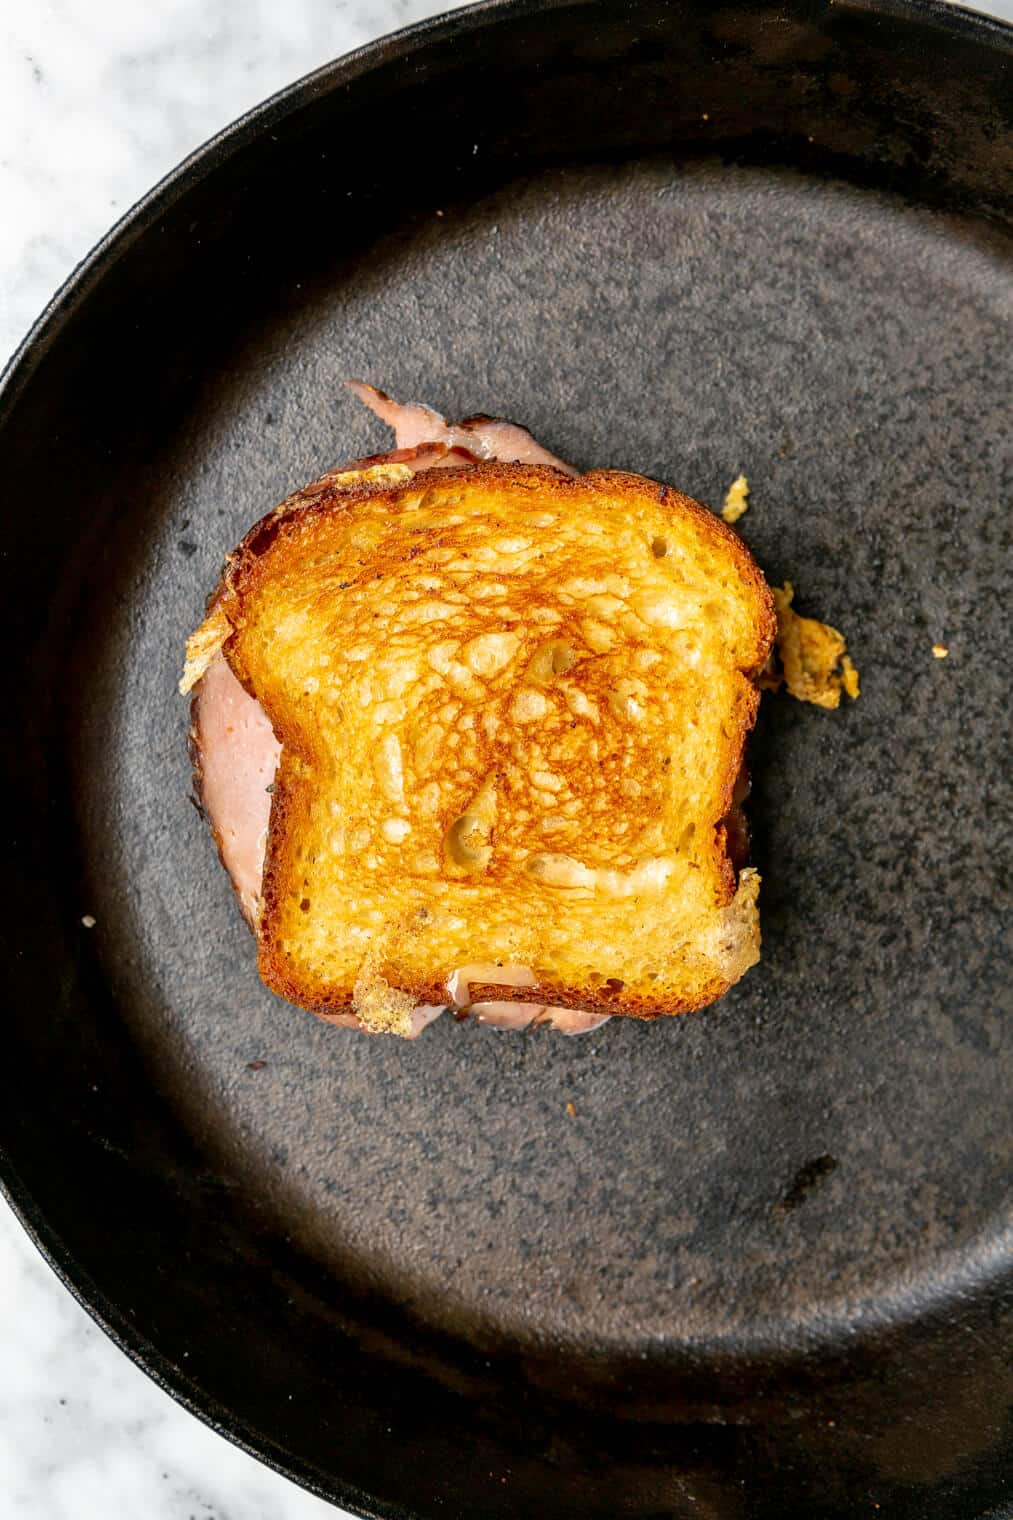 Grilled cheese sandwich in a cast iron skillet.